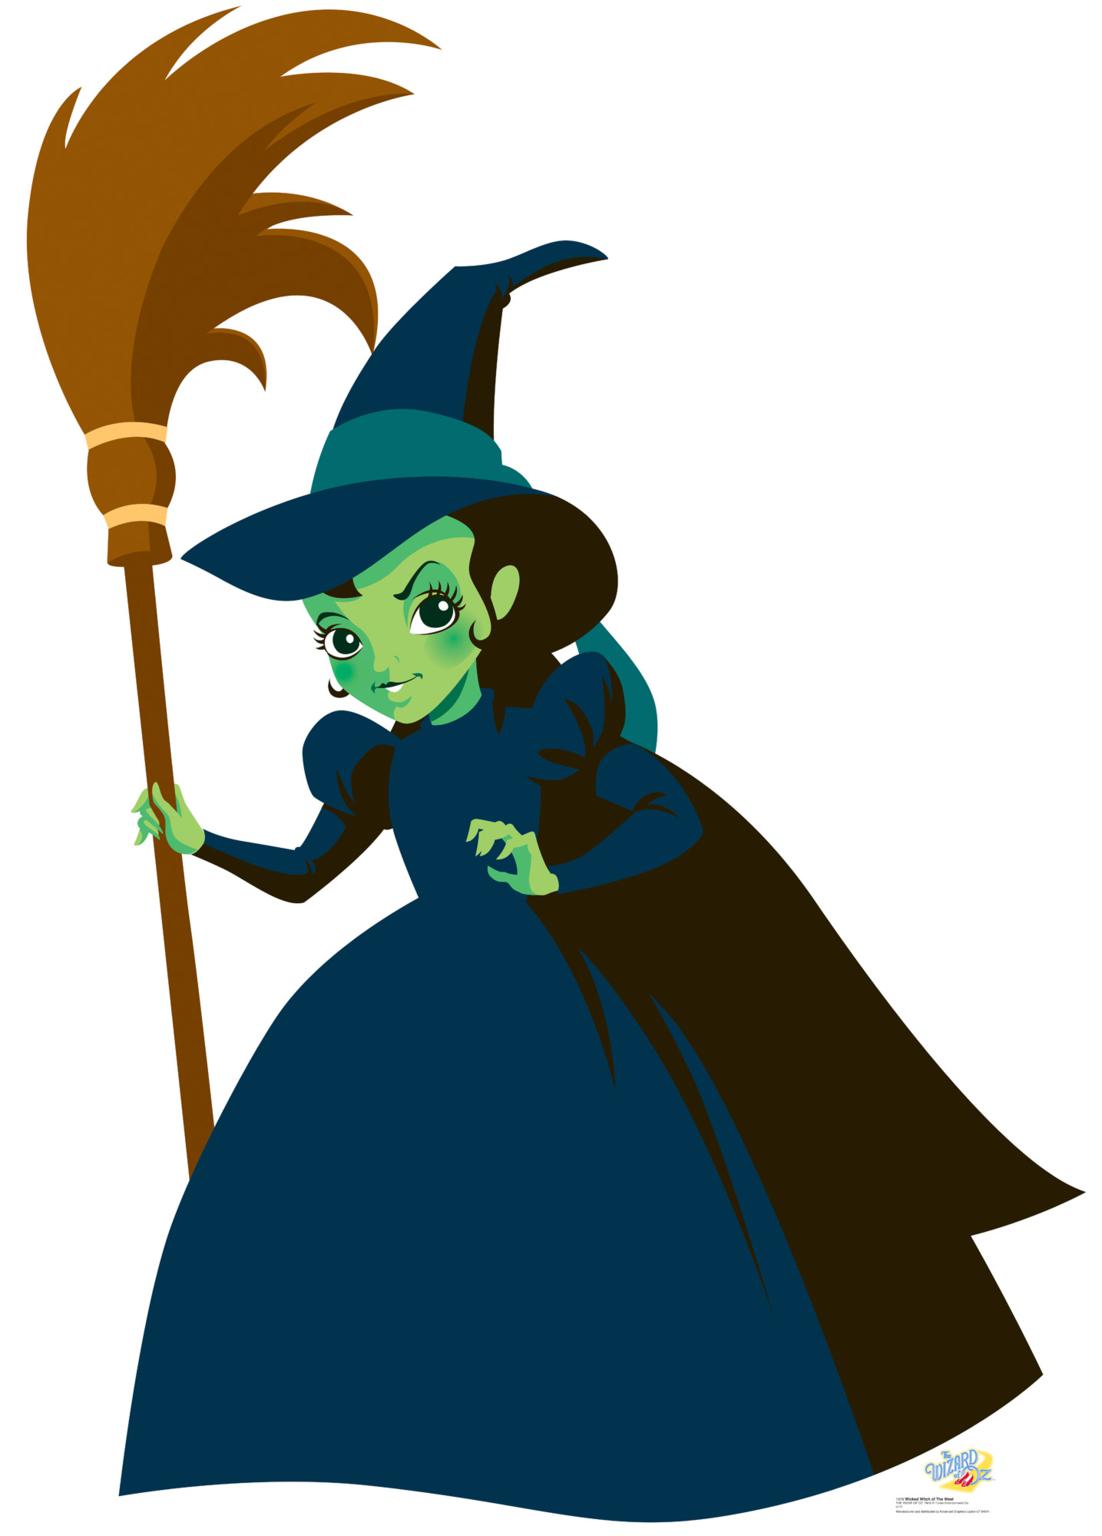 Wicked witch clipart